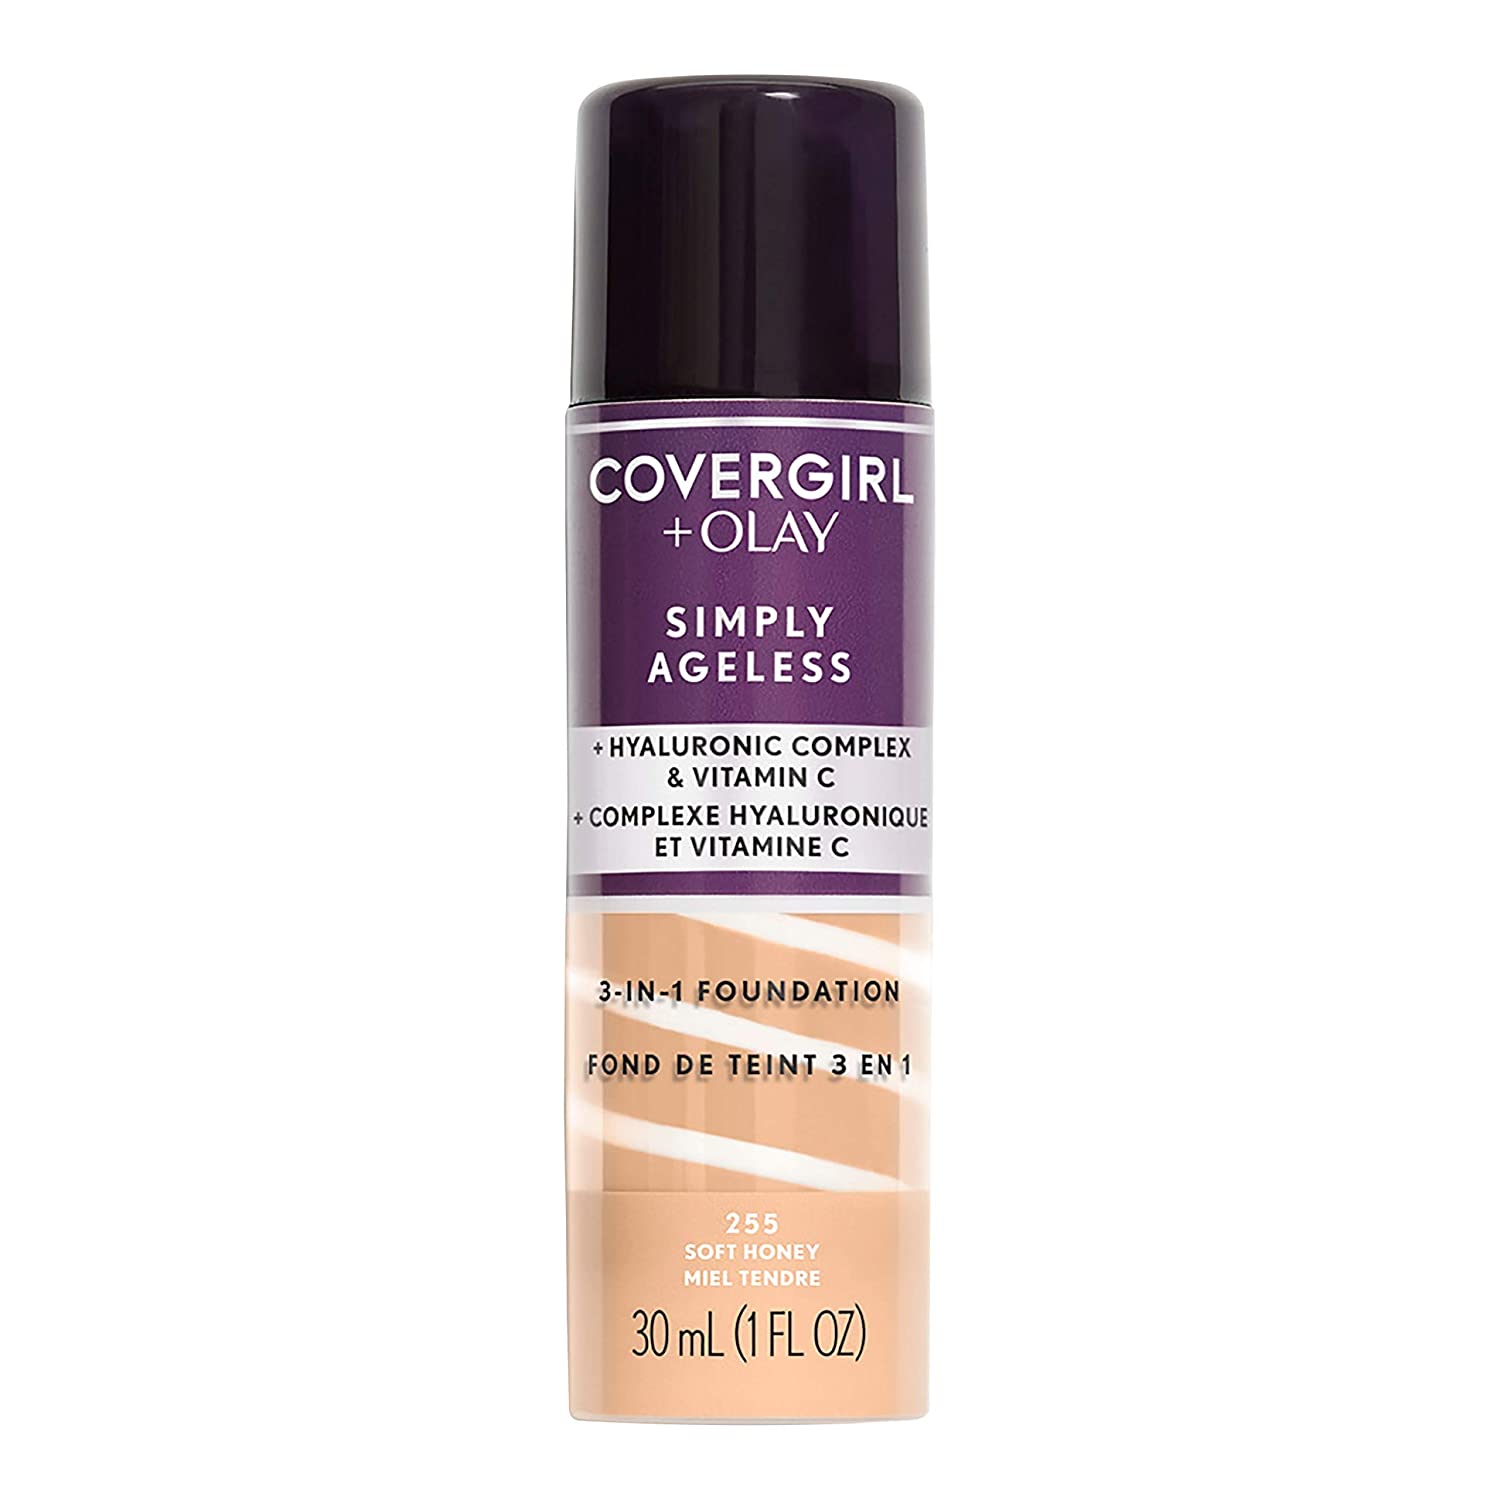 COVERGIRL+OLAY Simply Ageless 3-in-1 Liquid Foundation for Aging Skin